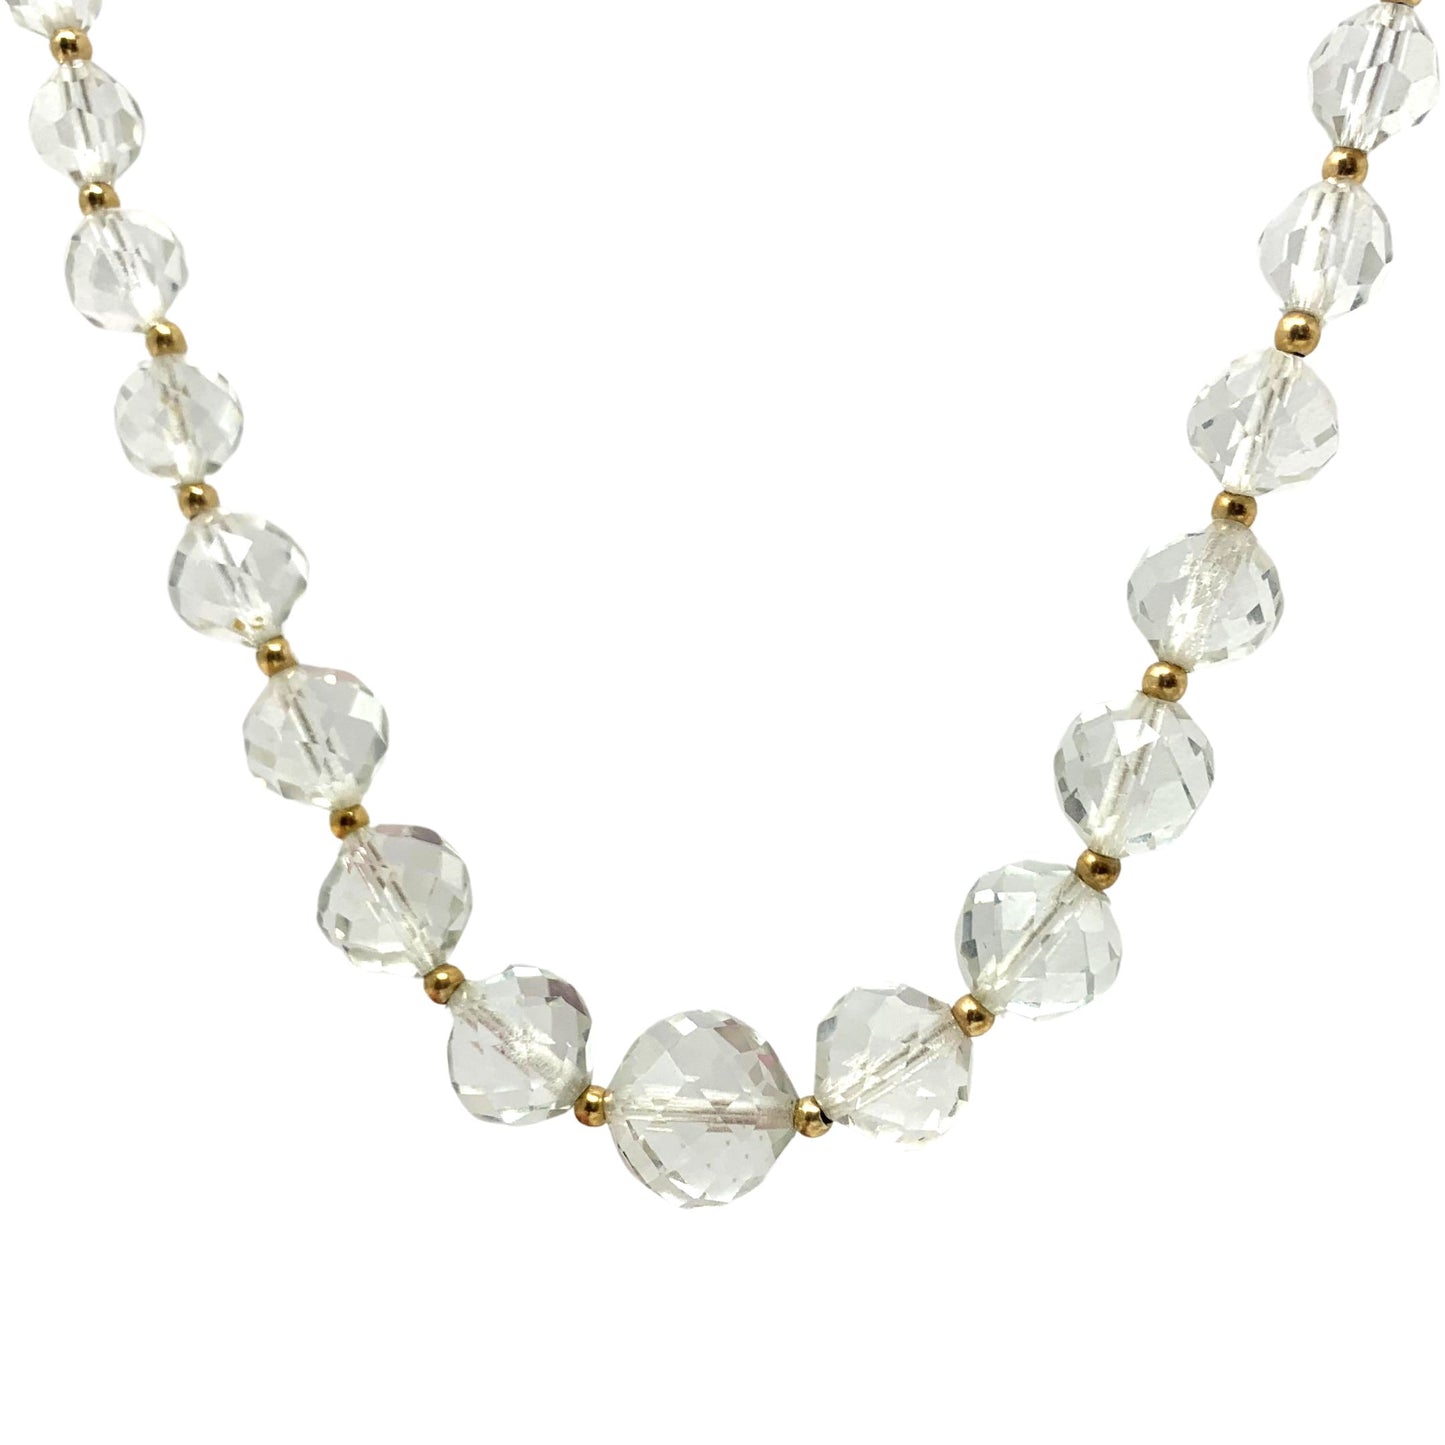 14K Gold Brilliant Crystal 22” Graduated Bead Necklace